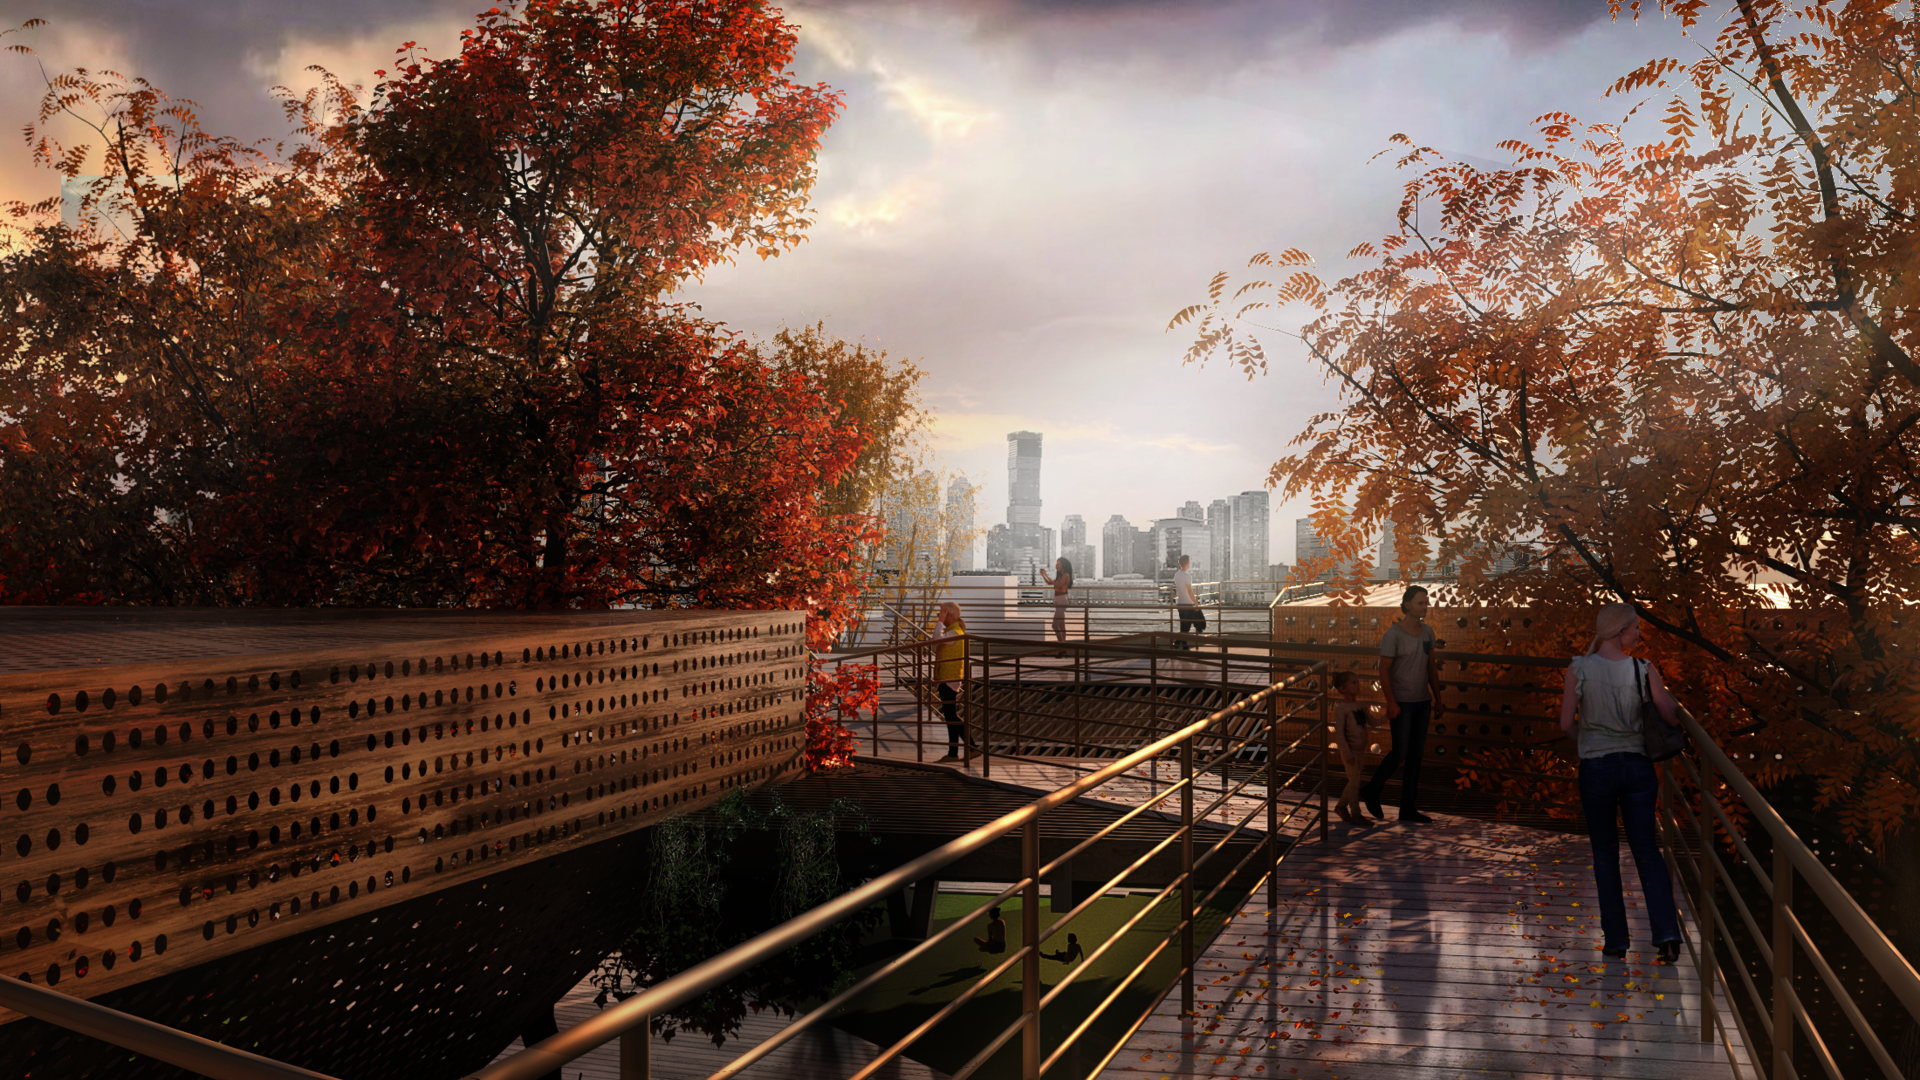 The flyover ascends eleven feet above the original structure, guiding visitors through canopies with autumn trees. Along this elevated path, the visitors will discover a viewing spur that offers a breathtaking panorama of the Jersey City skyline along the Hudson River.